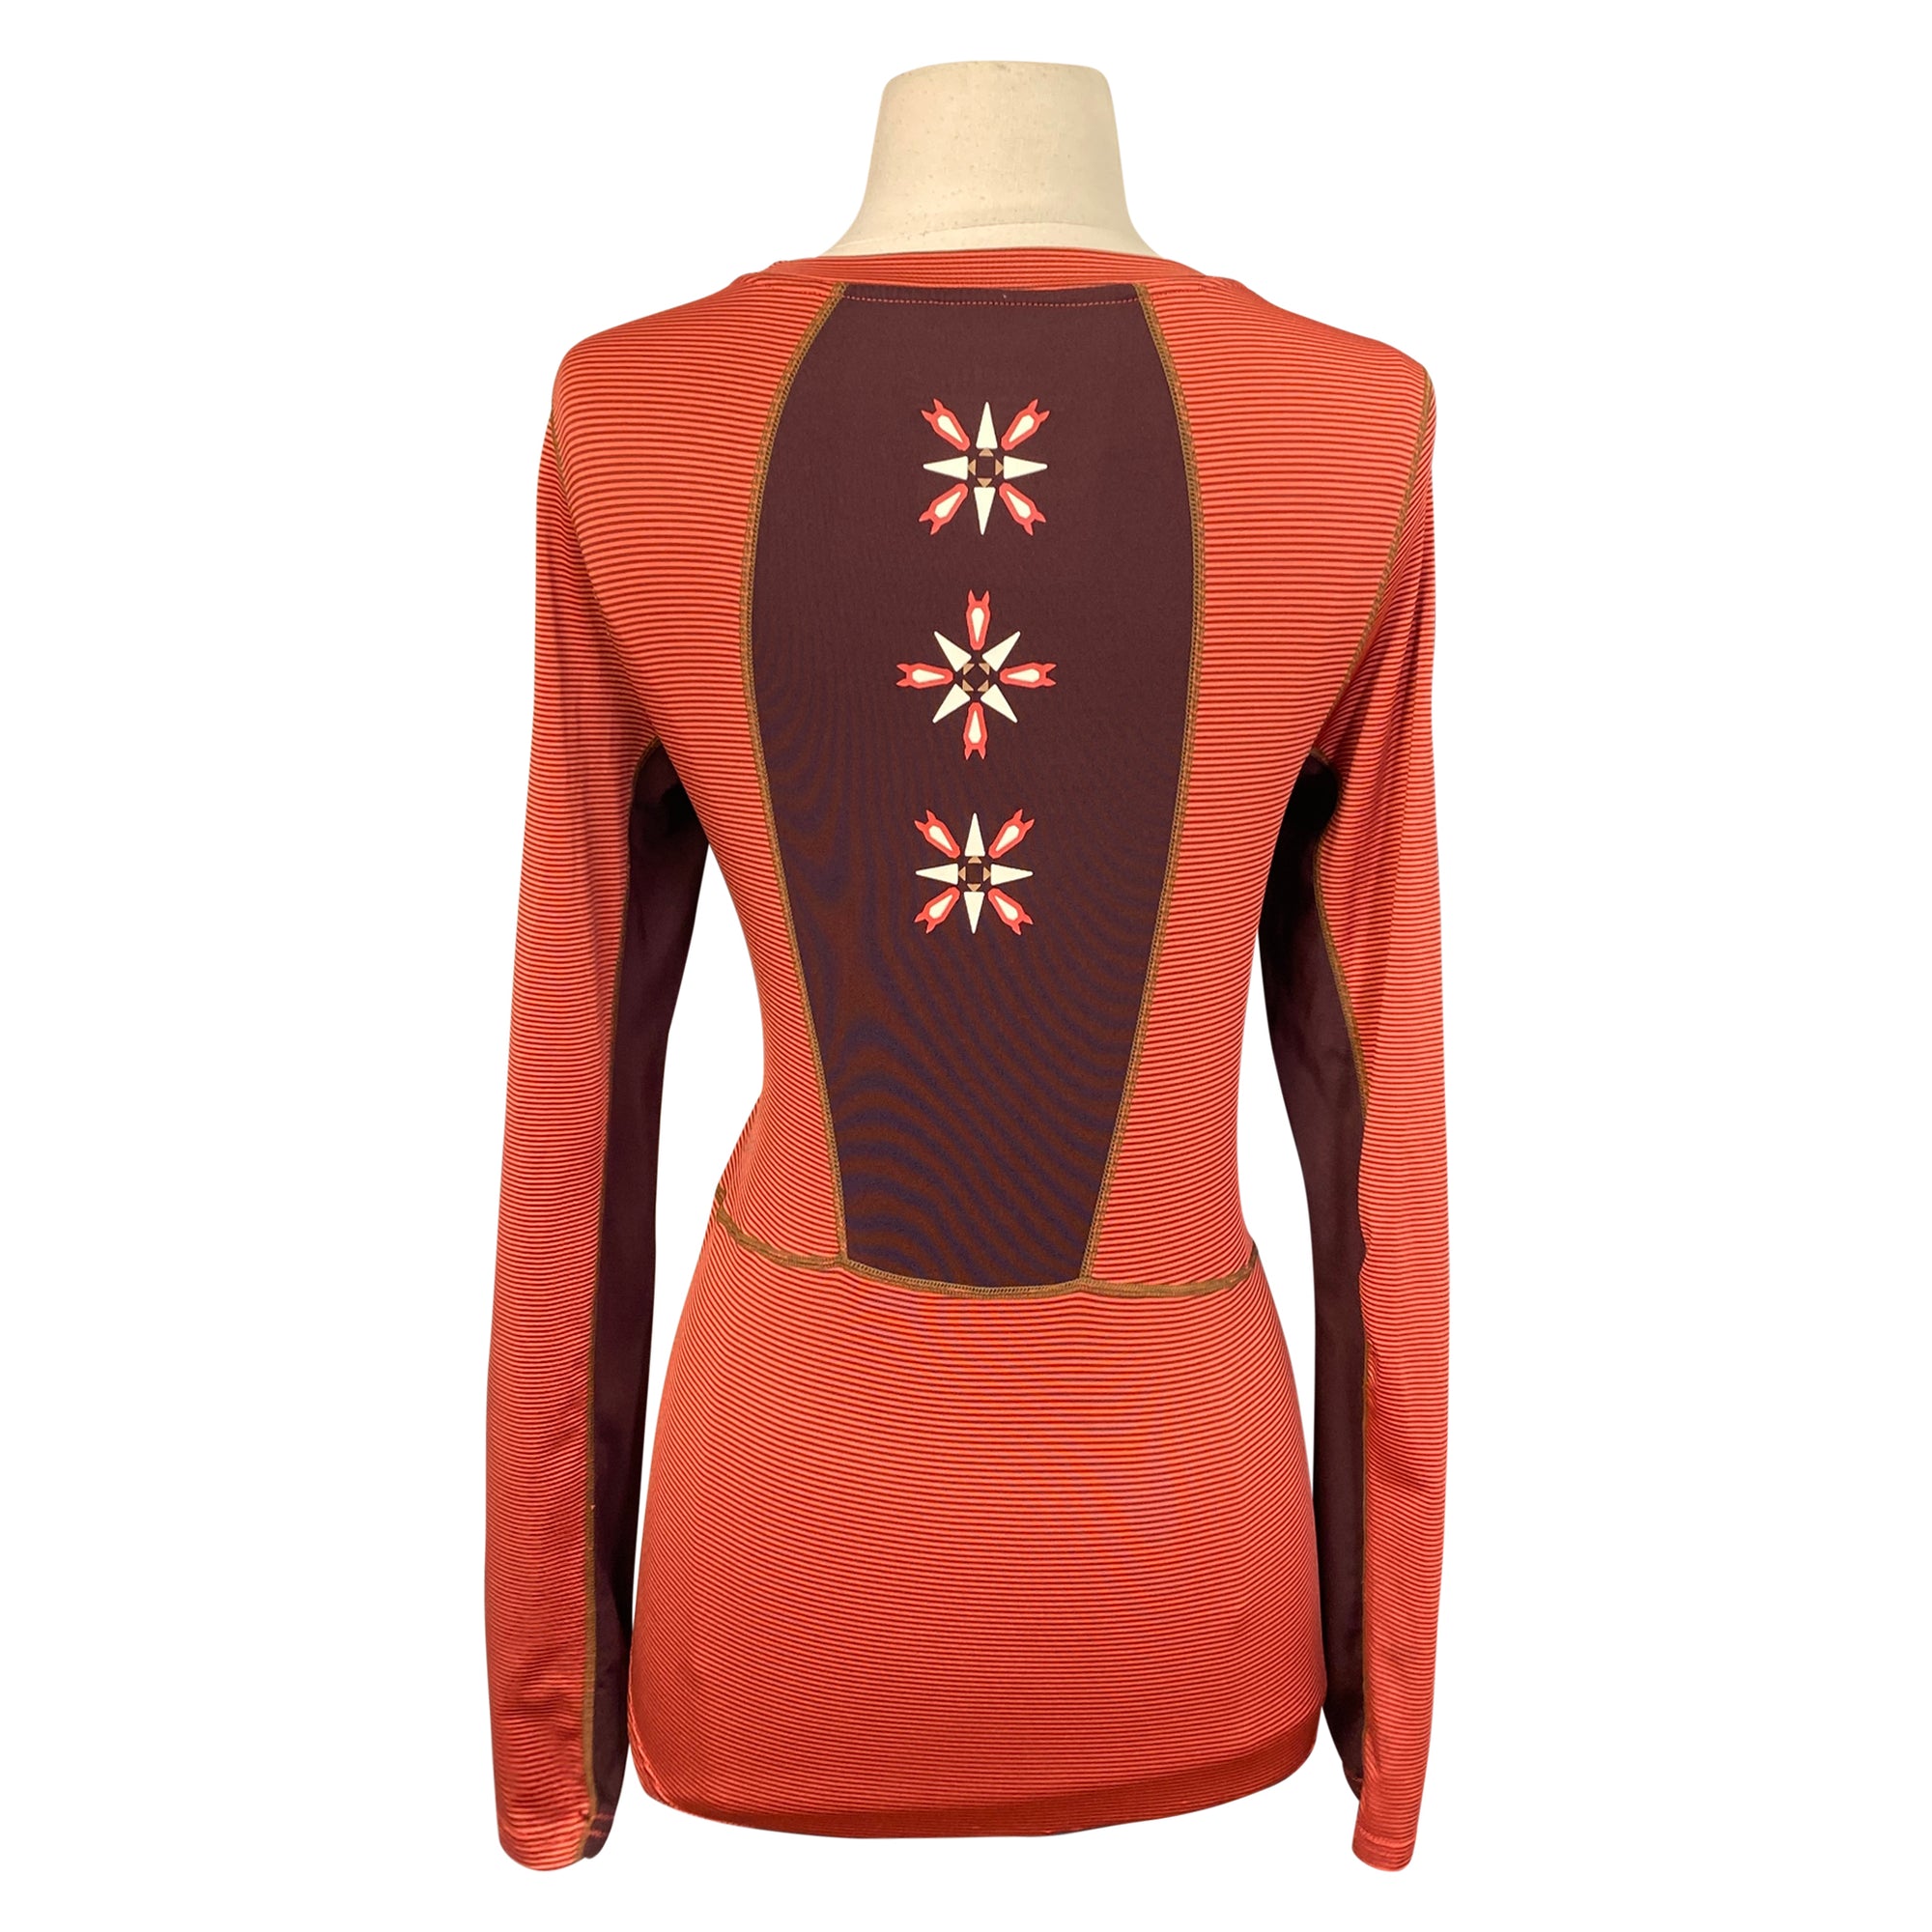 Kerrits 'Foundation' Baselayer in Red Stripe